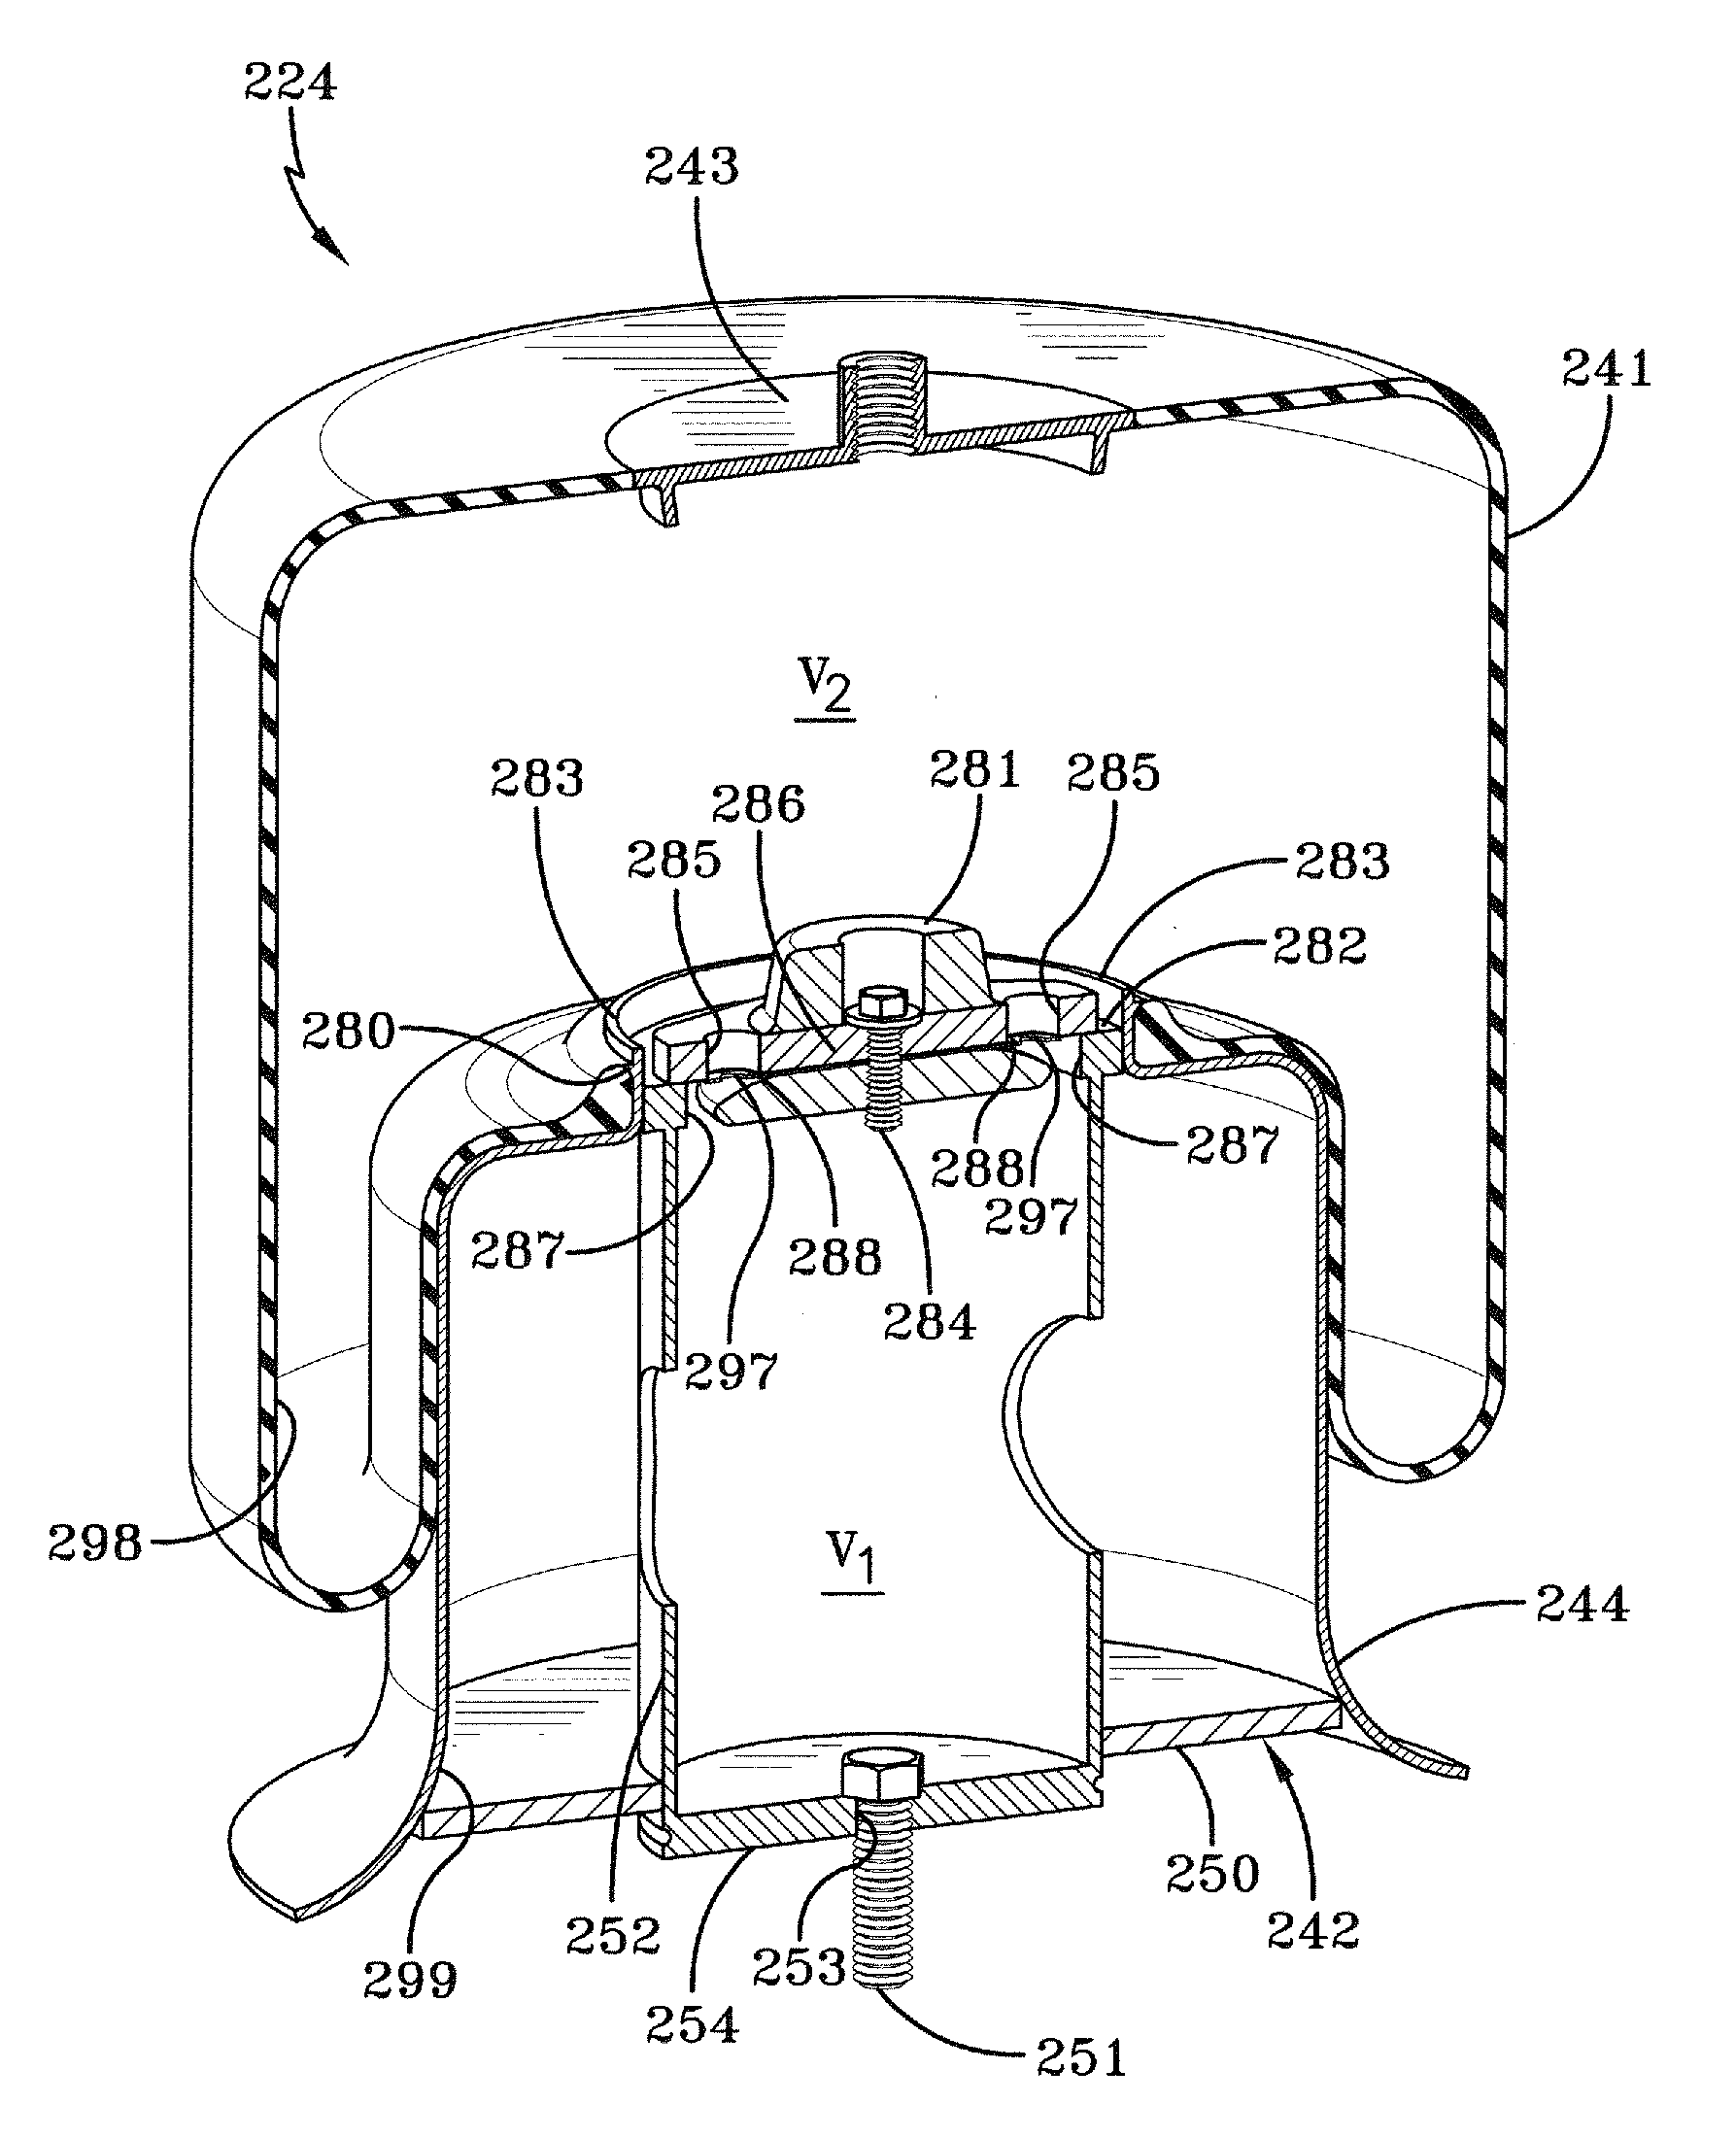 Air spring for a heavy-duty vehicle with damping features